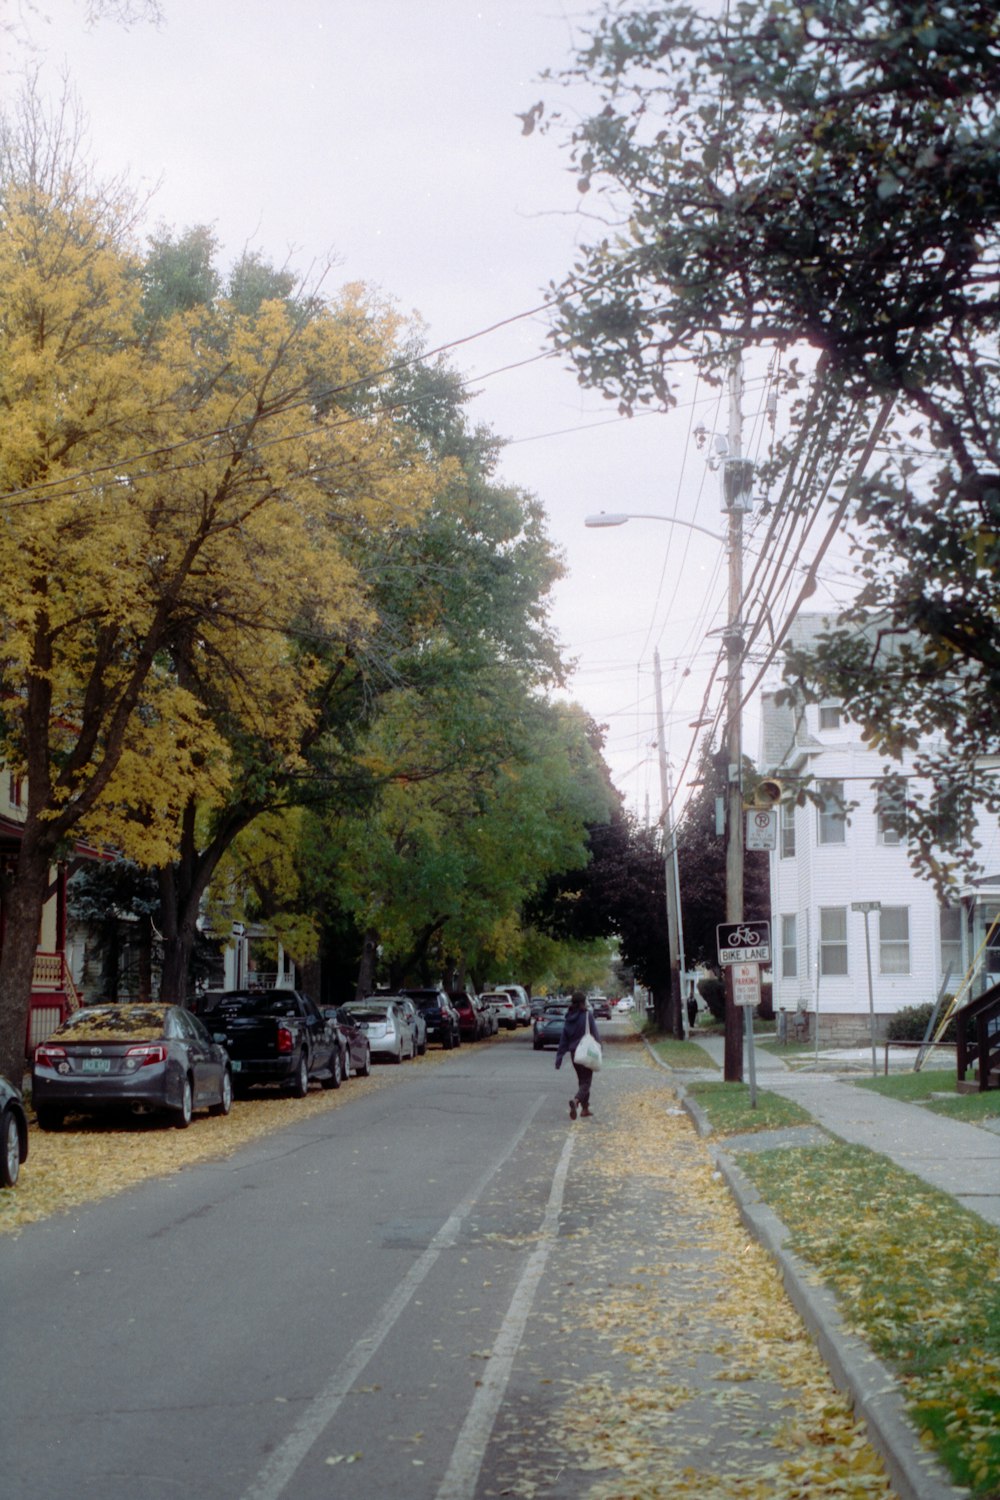 a person walking down a street lined with trees and buildings